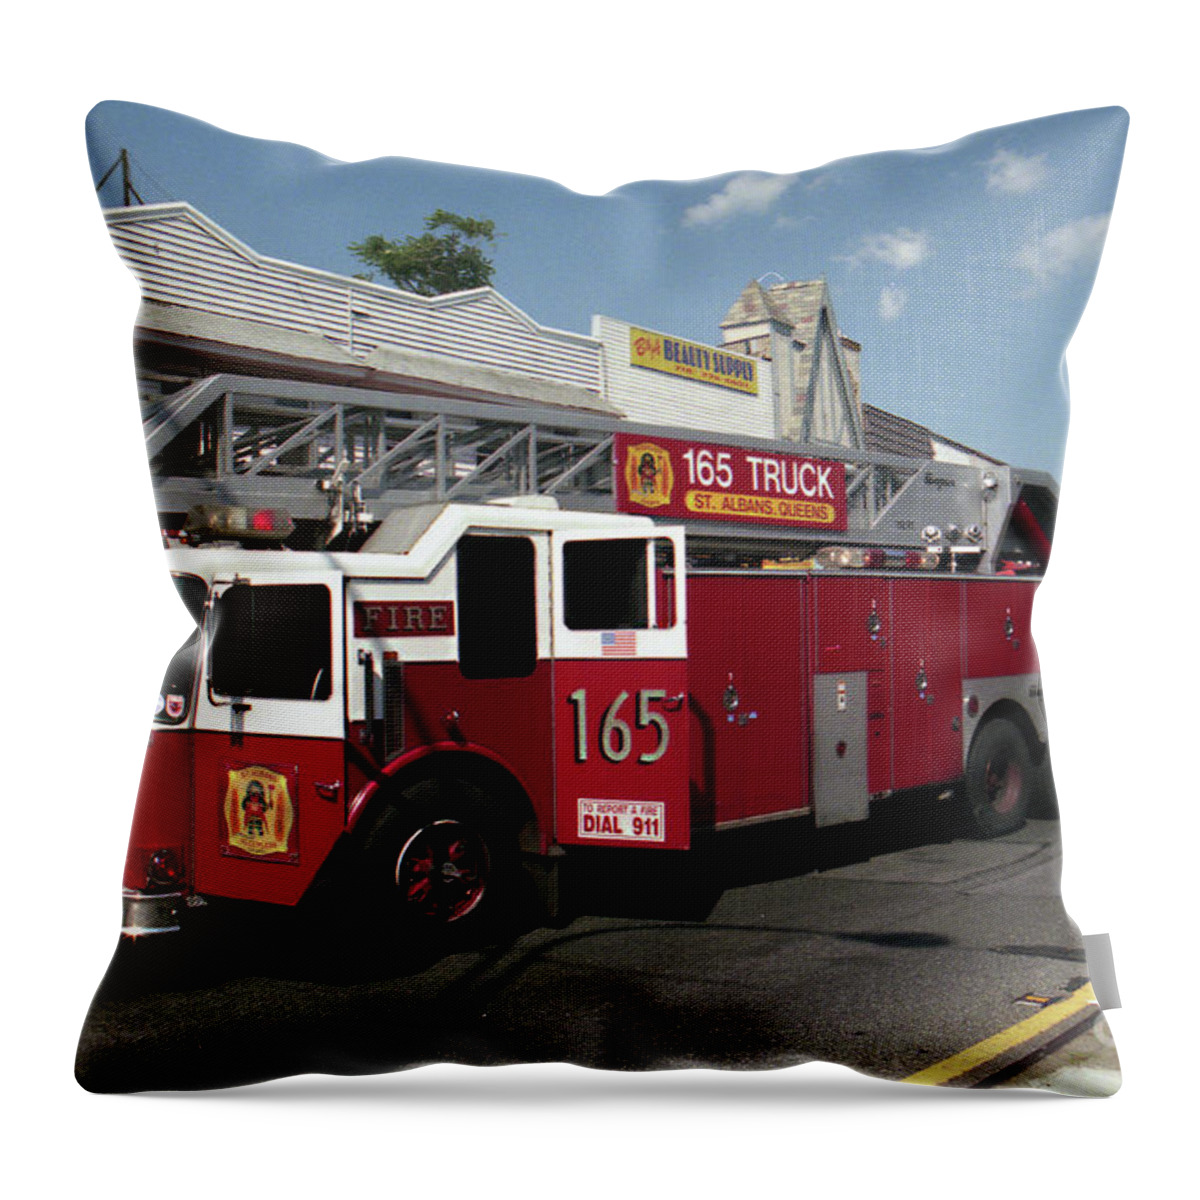 Fdny Throw Pillow featuring the photograph FDNY Ladder 165 by Steven Spak